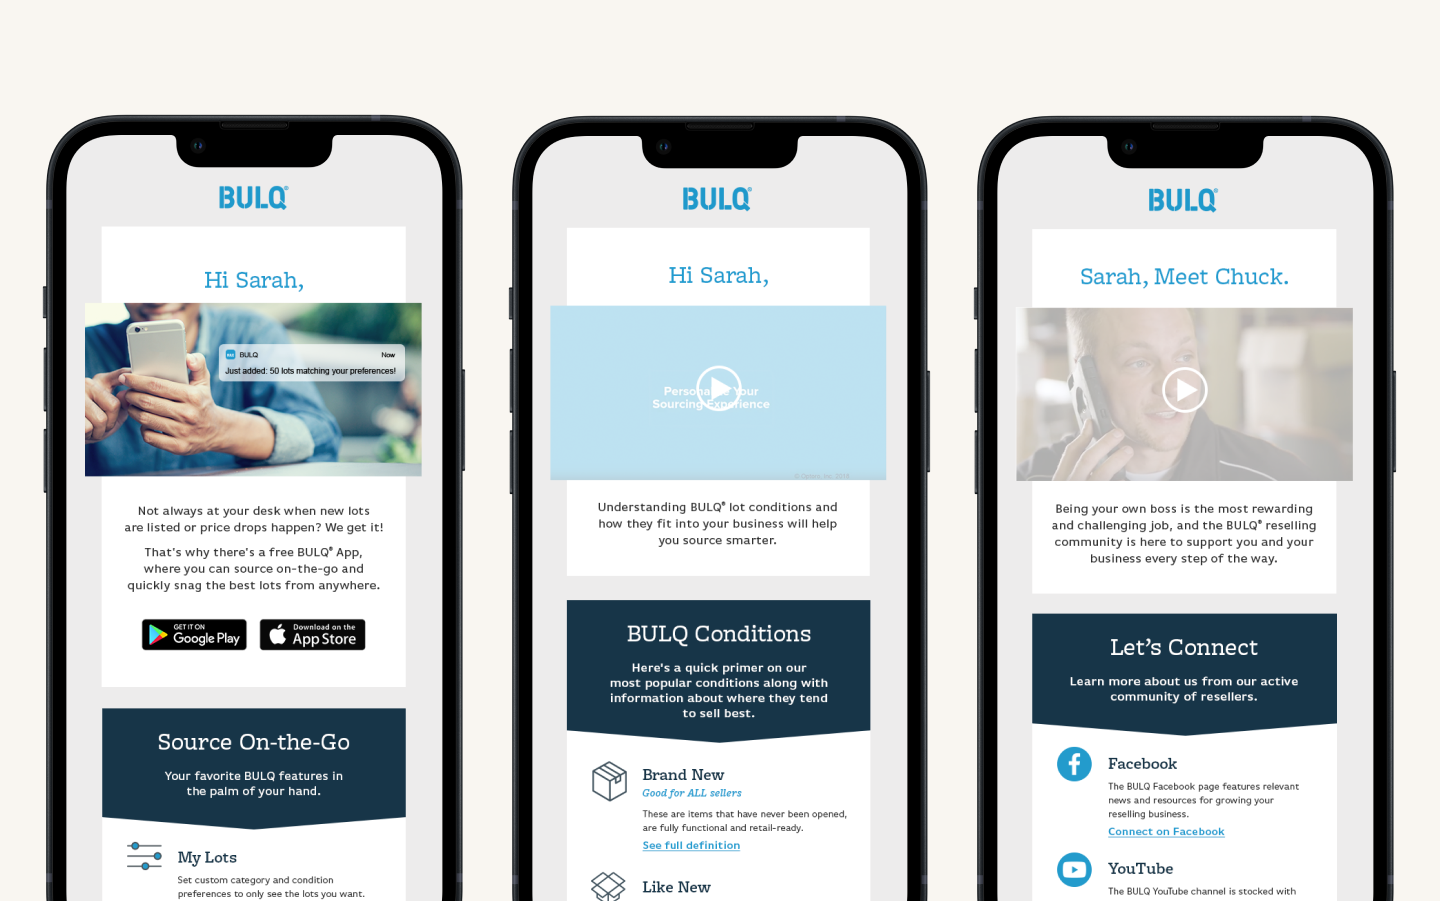 Why BULQ is Your One-Stop-Shop this Holiday